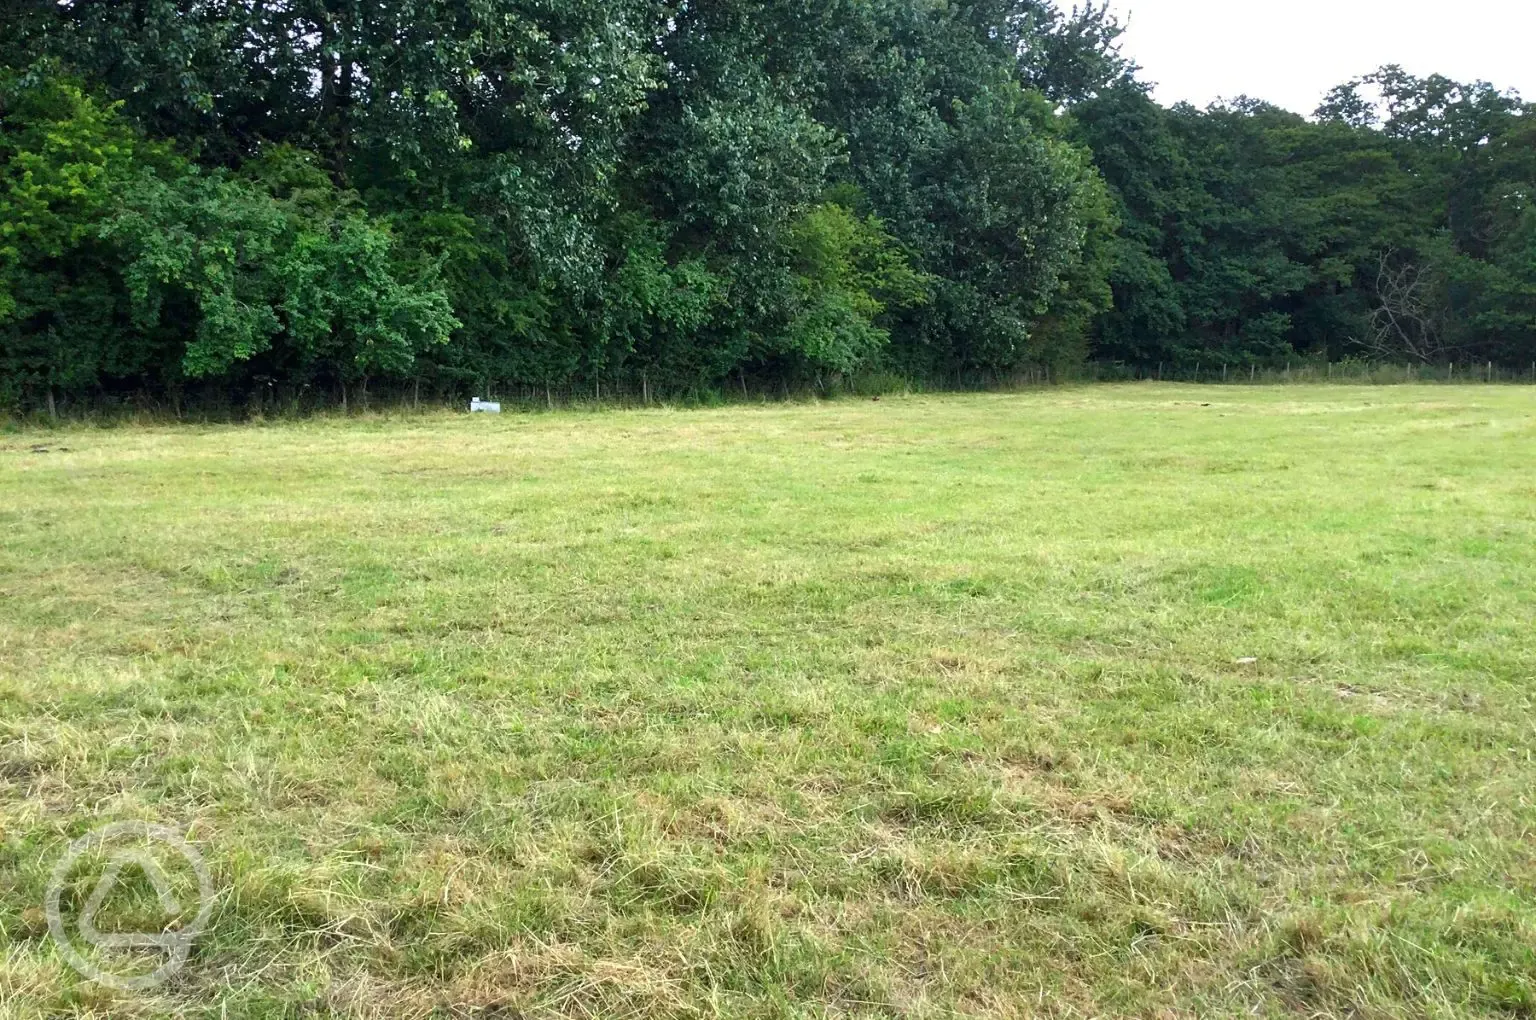 Grass pitches on the bottom field